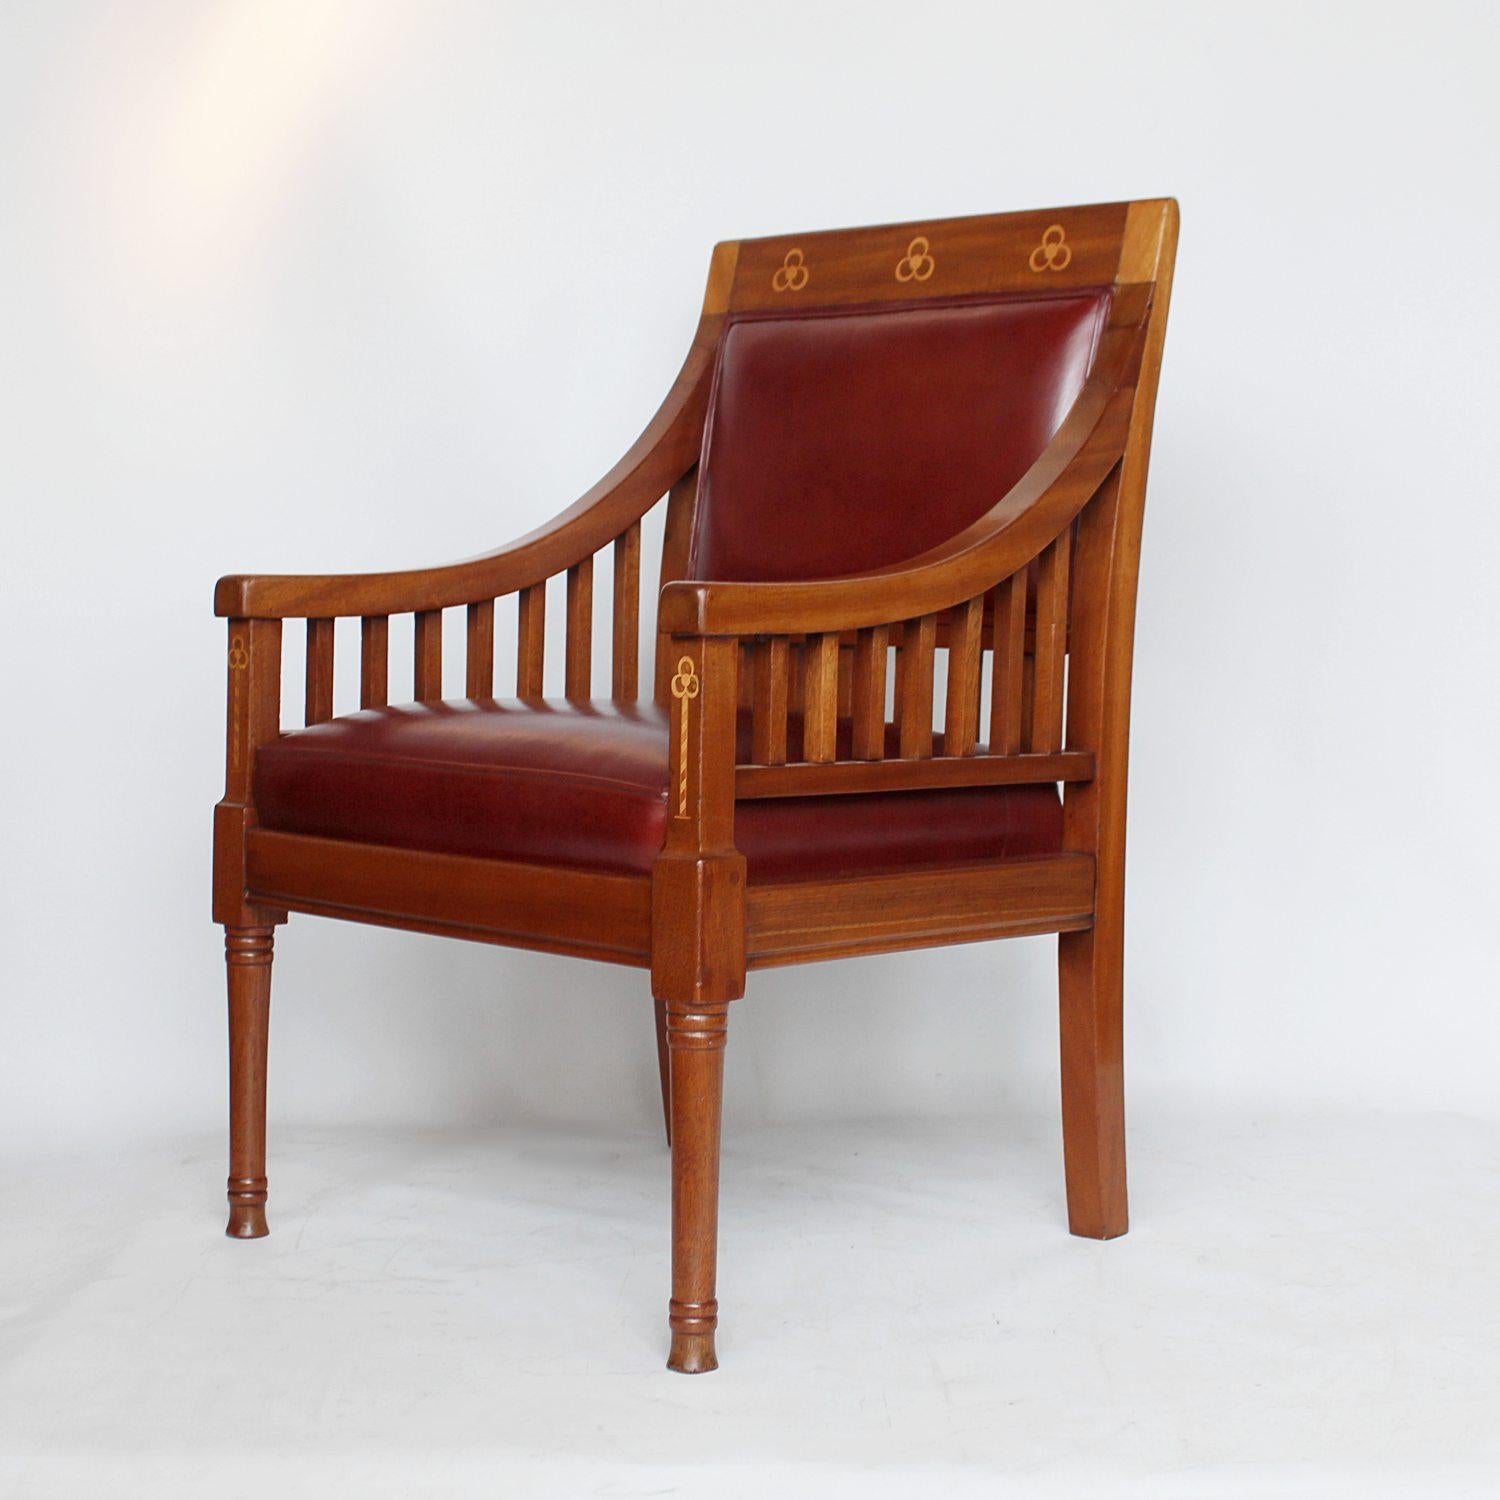 A pair of Arts & Crafts armchairs. Solid walnut frames, with satinwood inlay. Upholstered in chestnut leather.
Dimensions: H 90cm, W 56cm, D 60cm, seat H 45cm, seat D 48cm.

